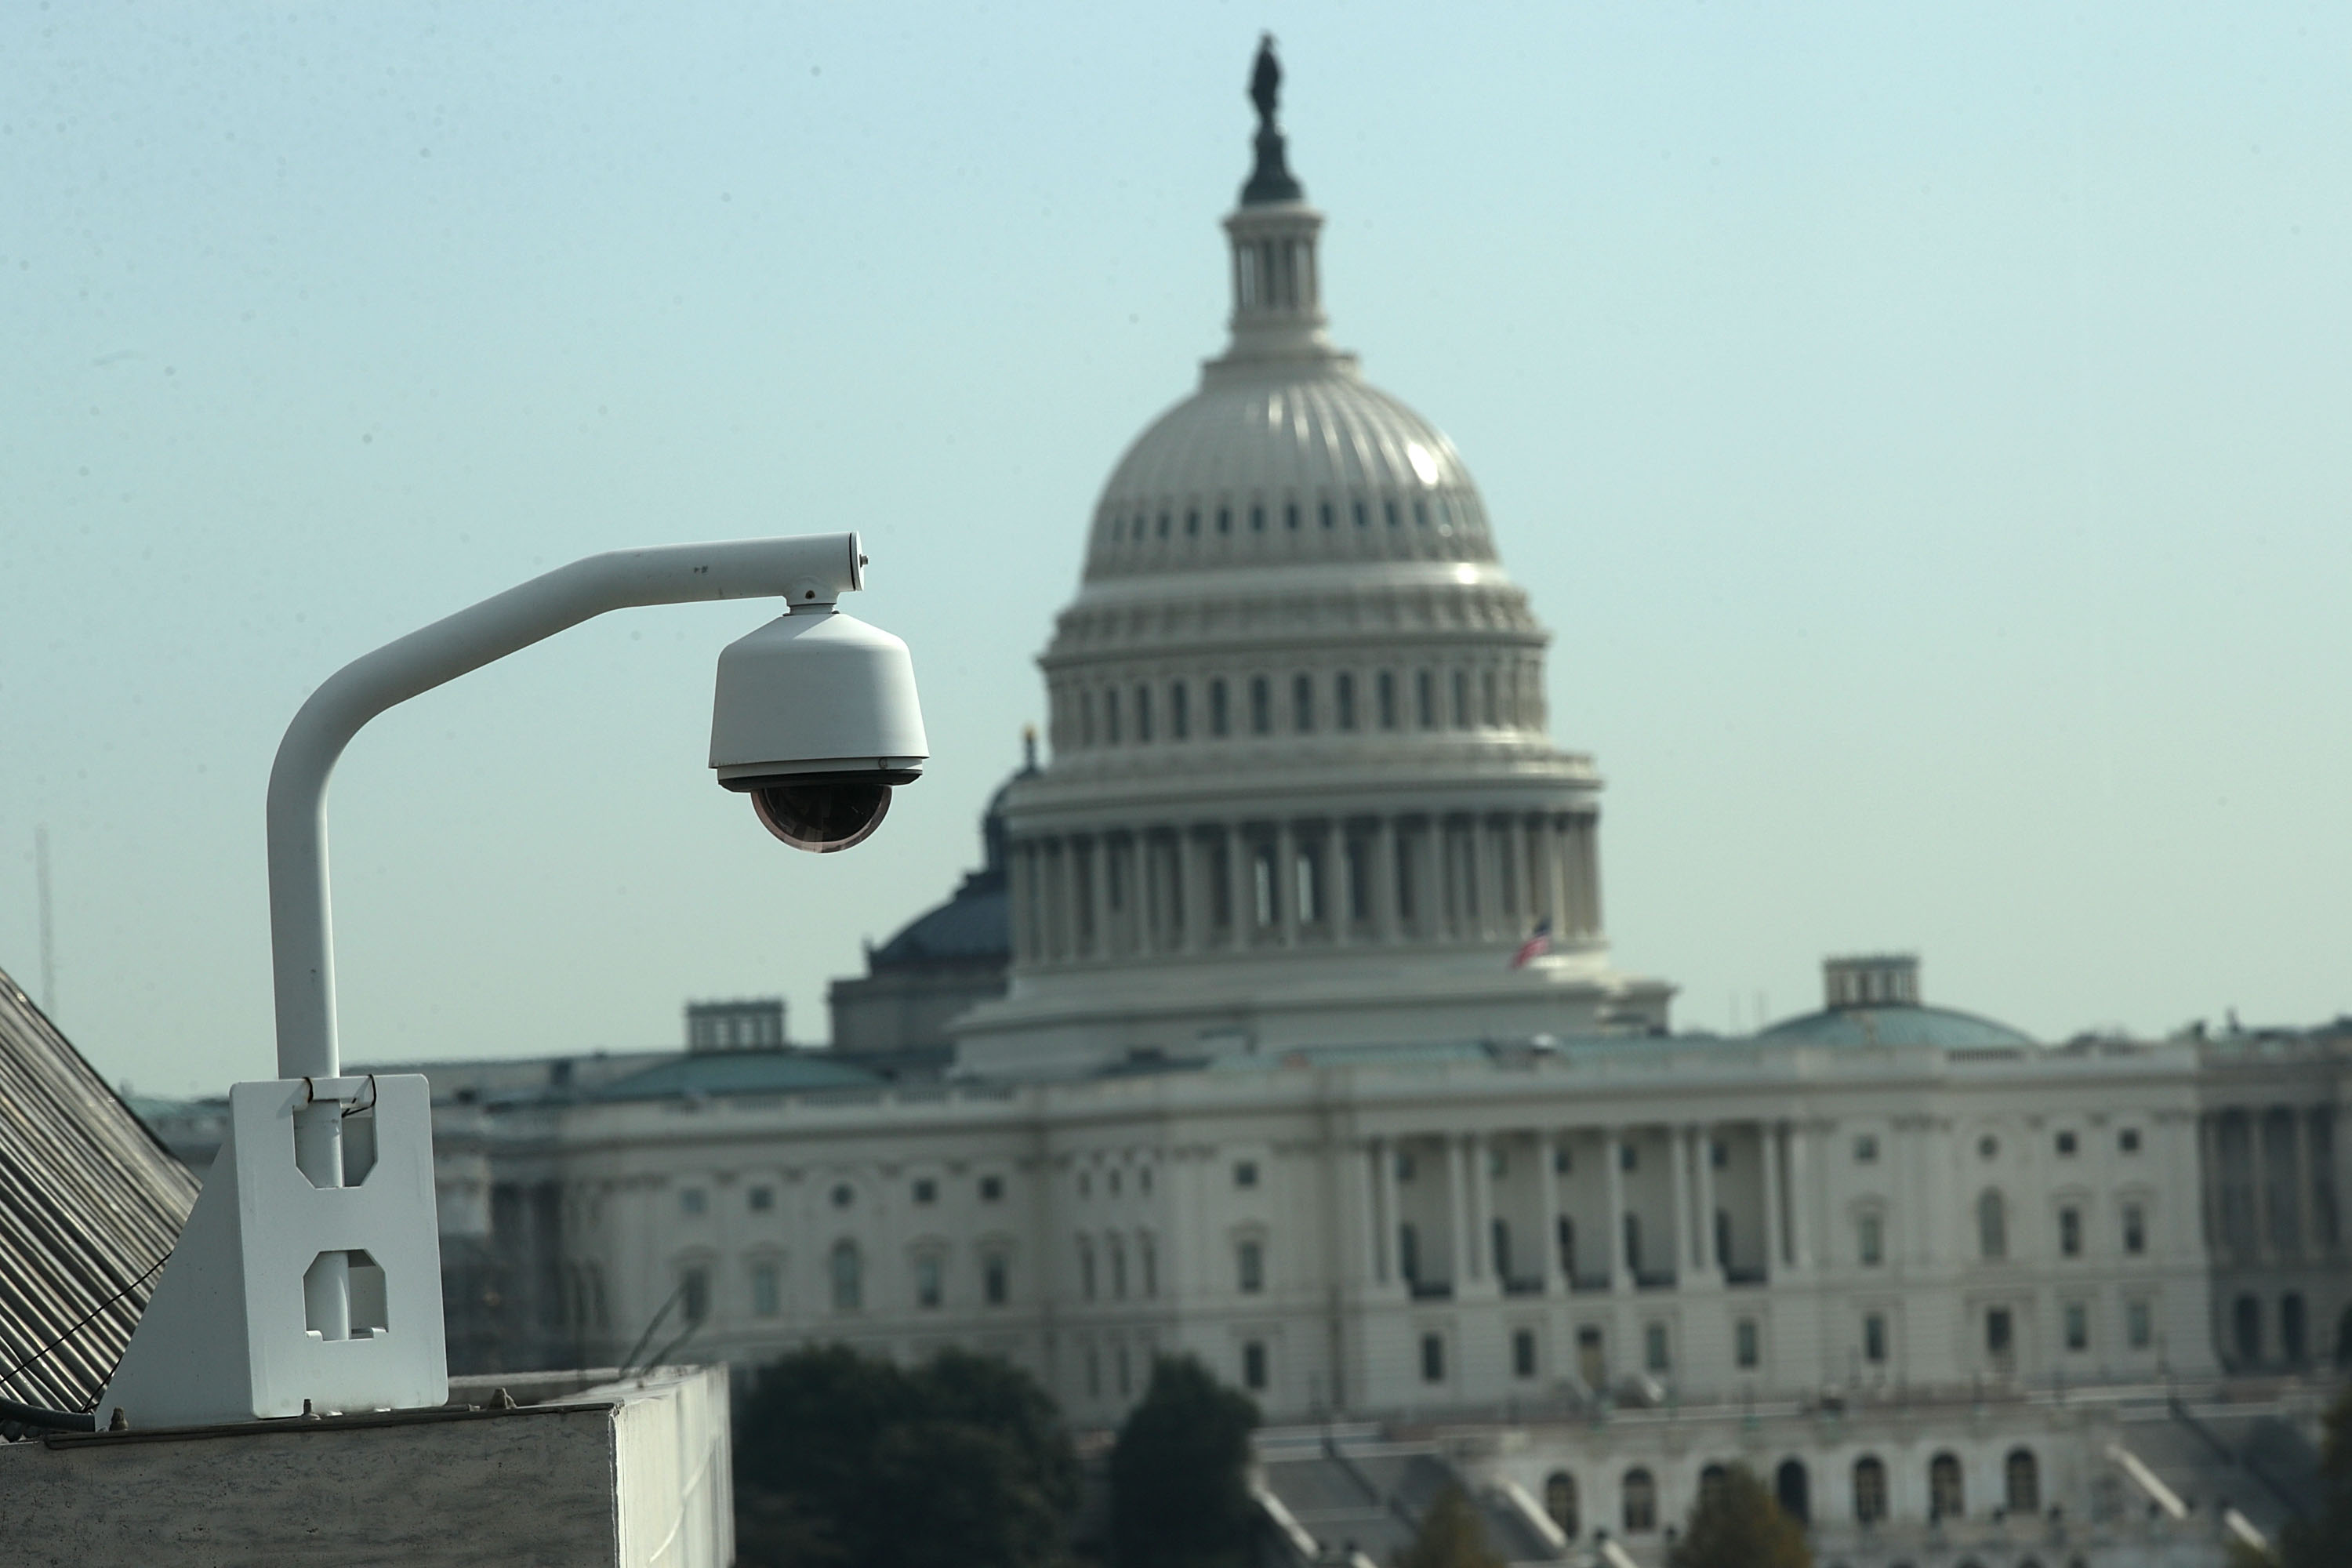 As the U.S. Capitol is seen in the background, a CCTV camera is mounted on a building roof November 3, 2017 in Washington, DC. (Photo by Alex Wong/Getty Images)